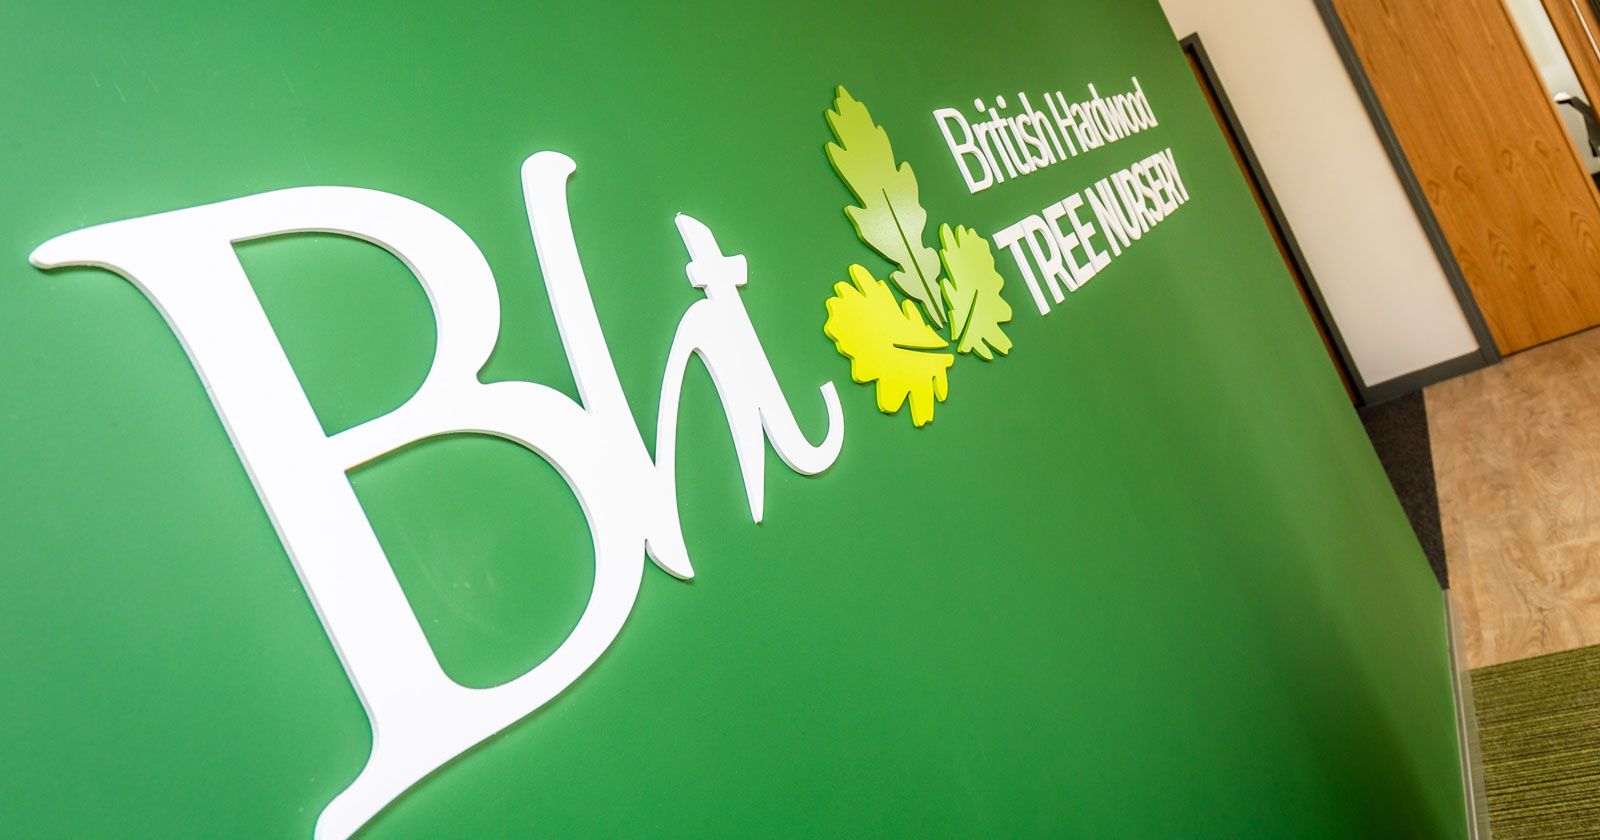 British Hardwood Tree Nursery feature wall signage and logo by APSS